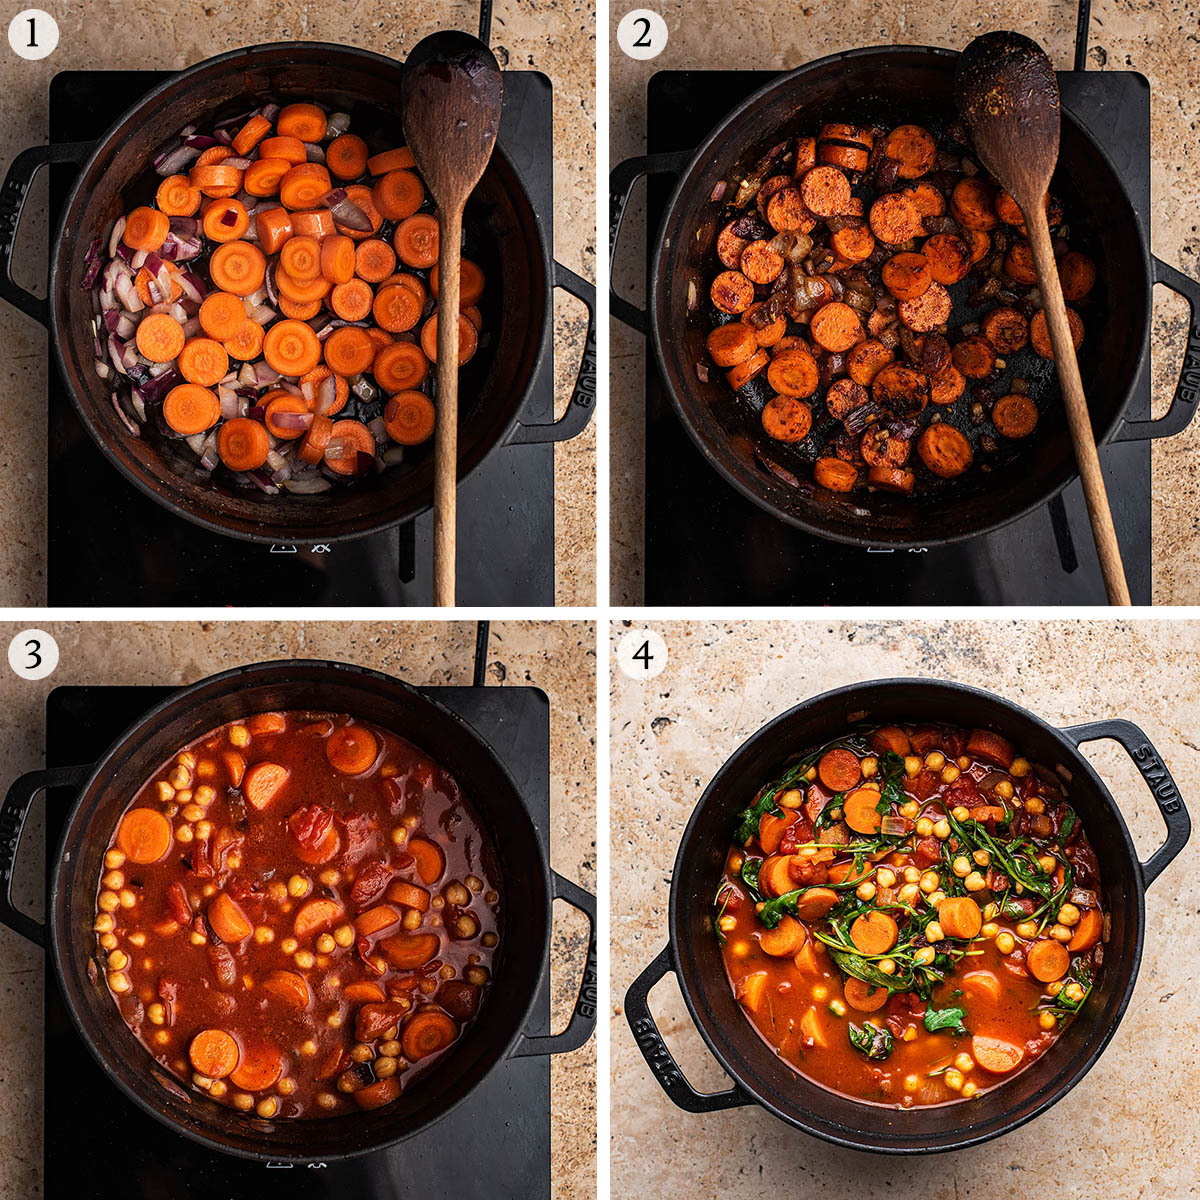 Carrot stew steps 1 to 4.